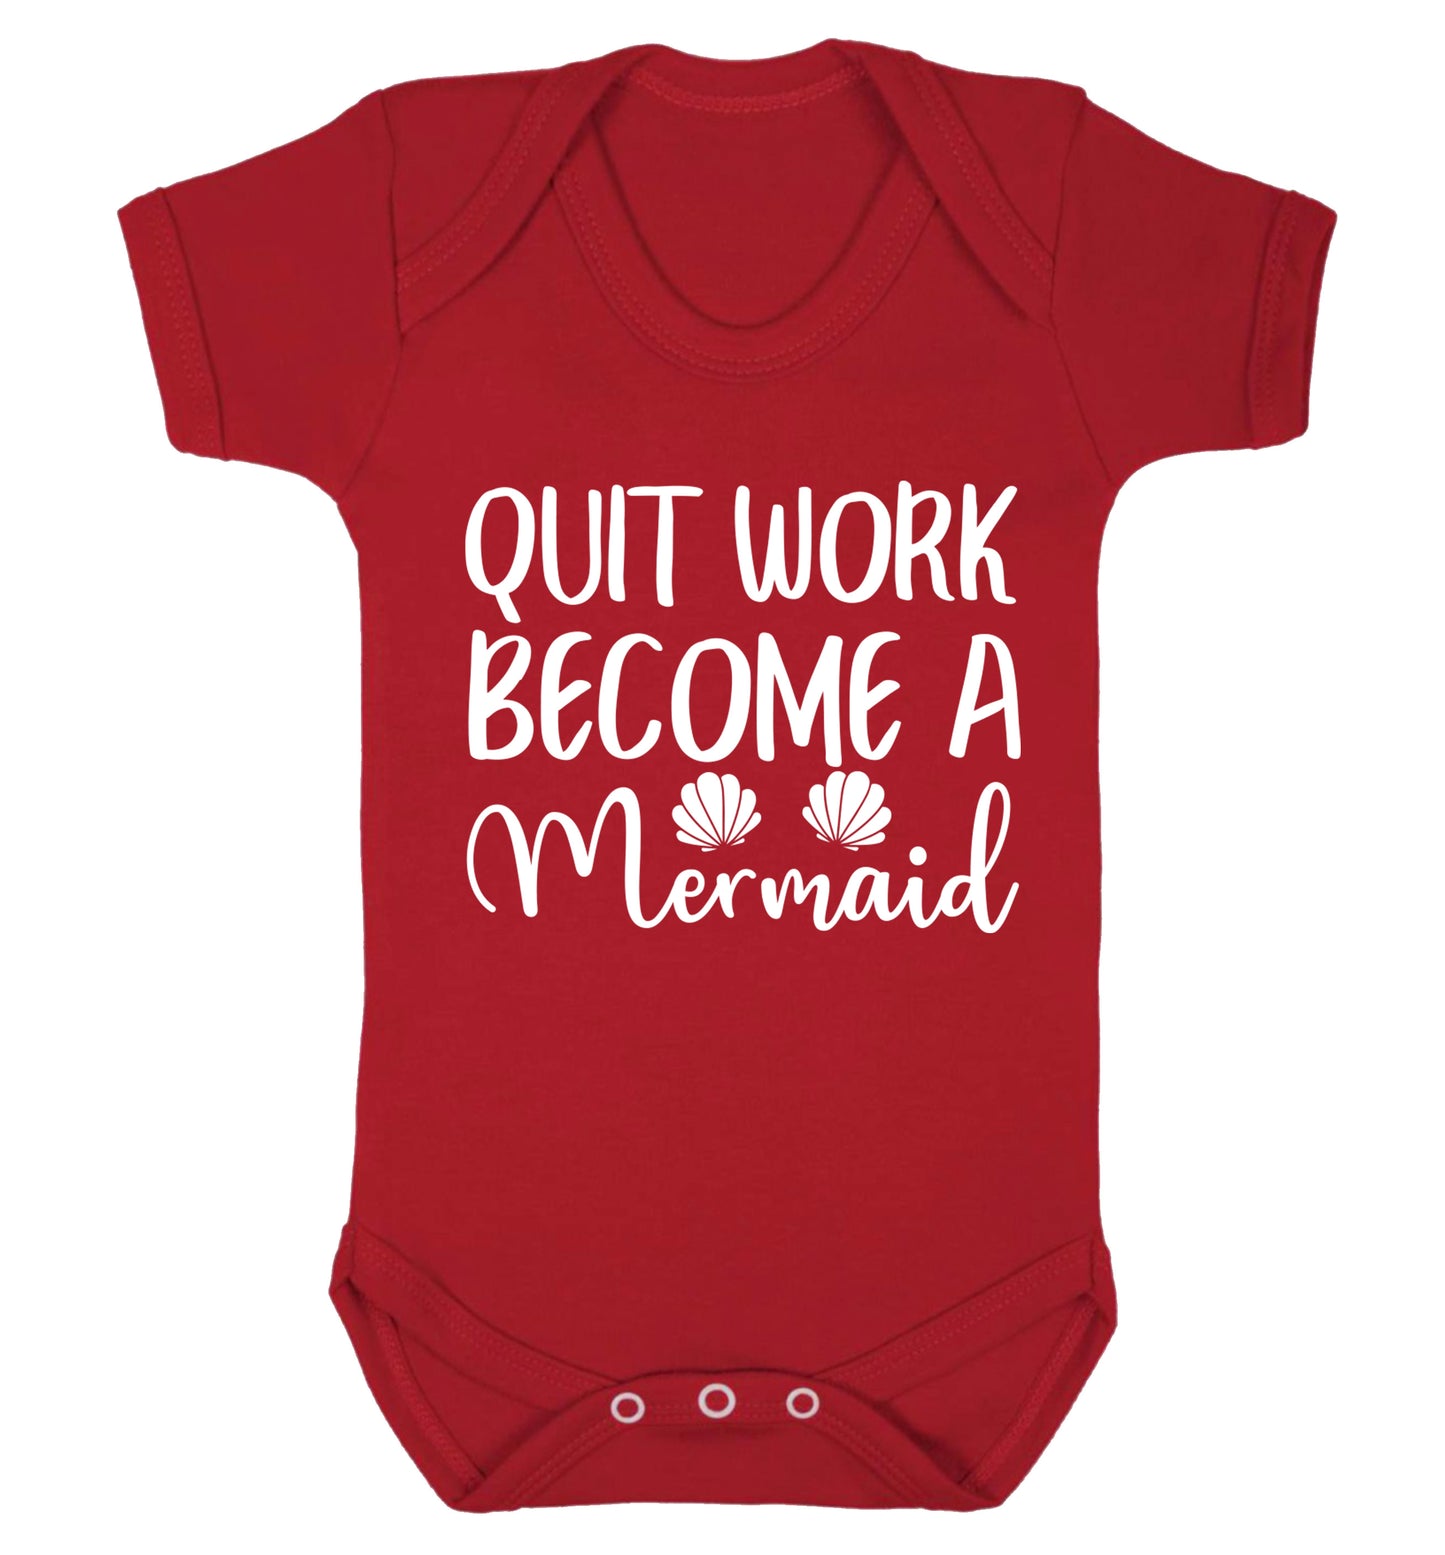 Quit work become a mermaid Baby Vest red 18-24 months